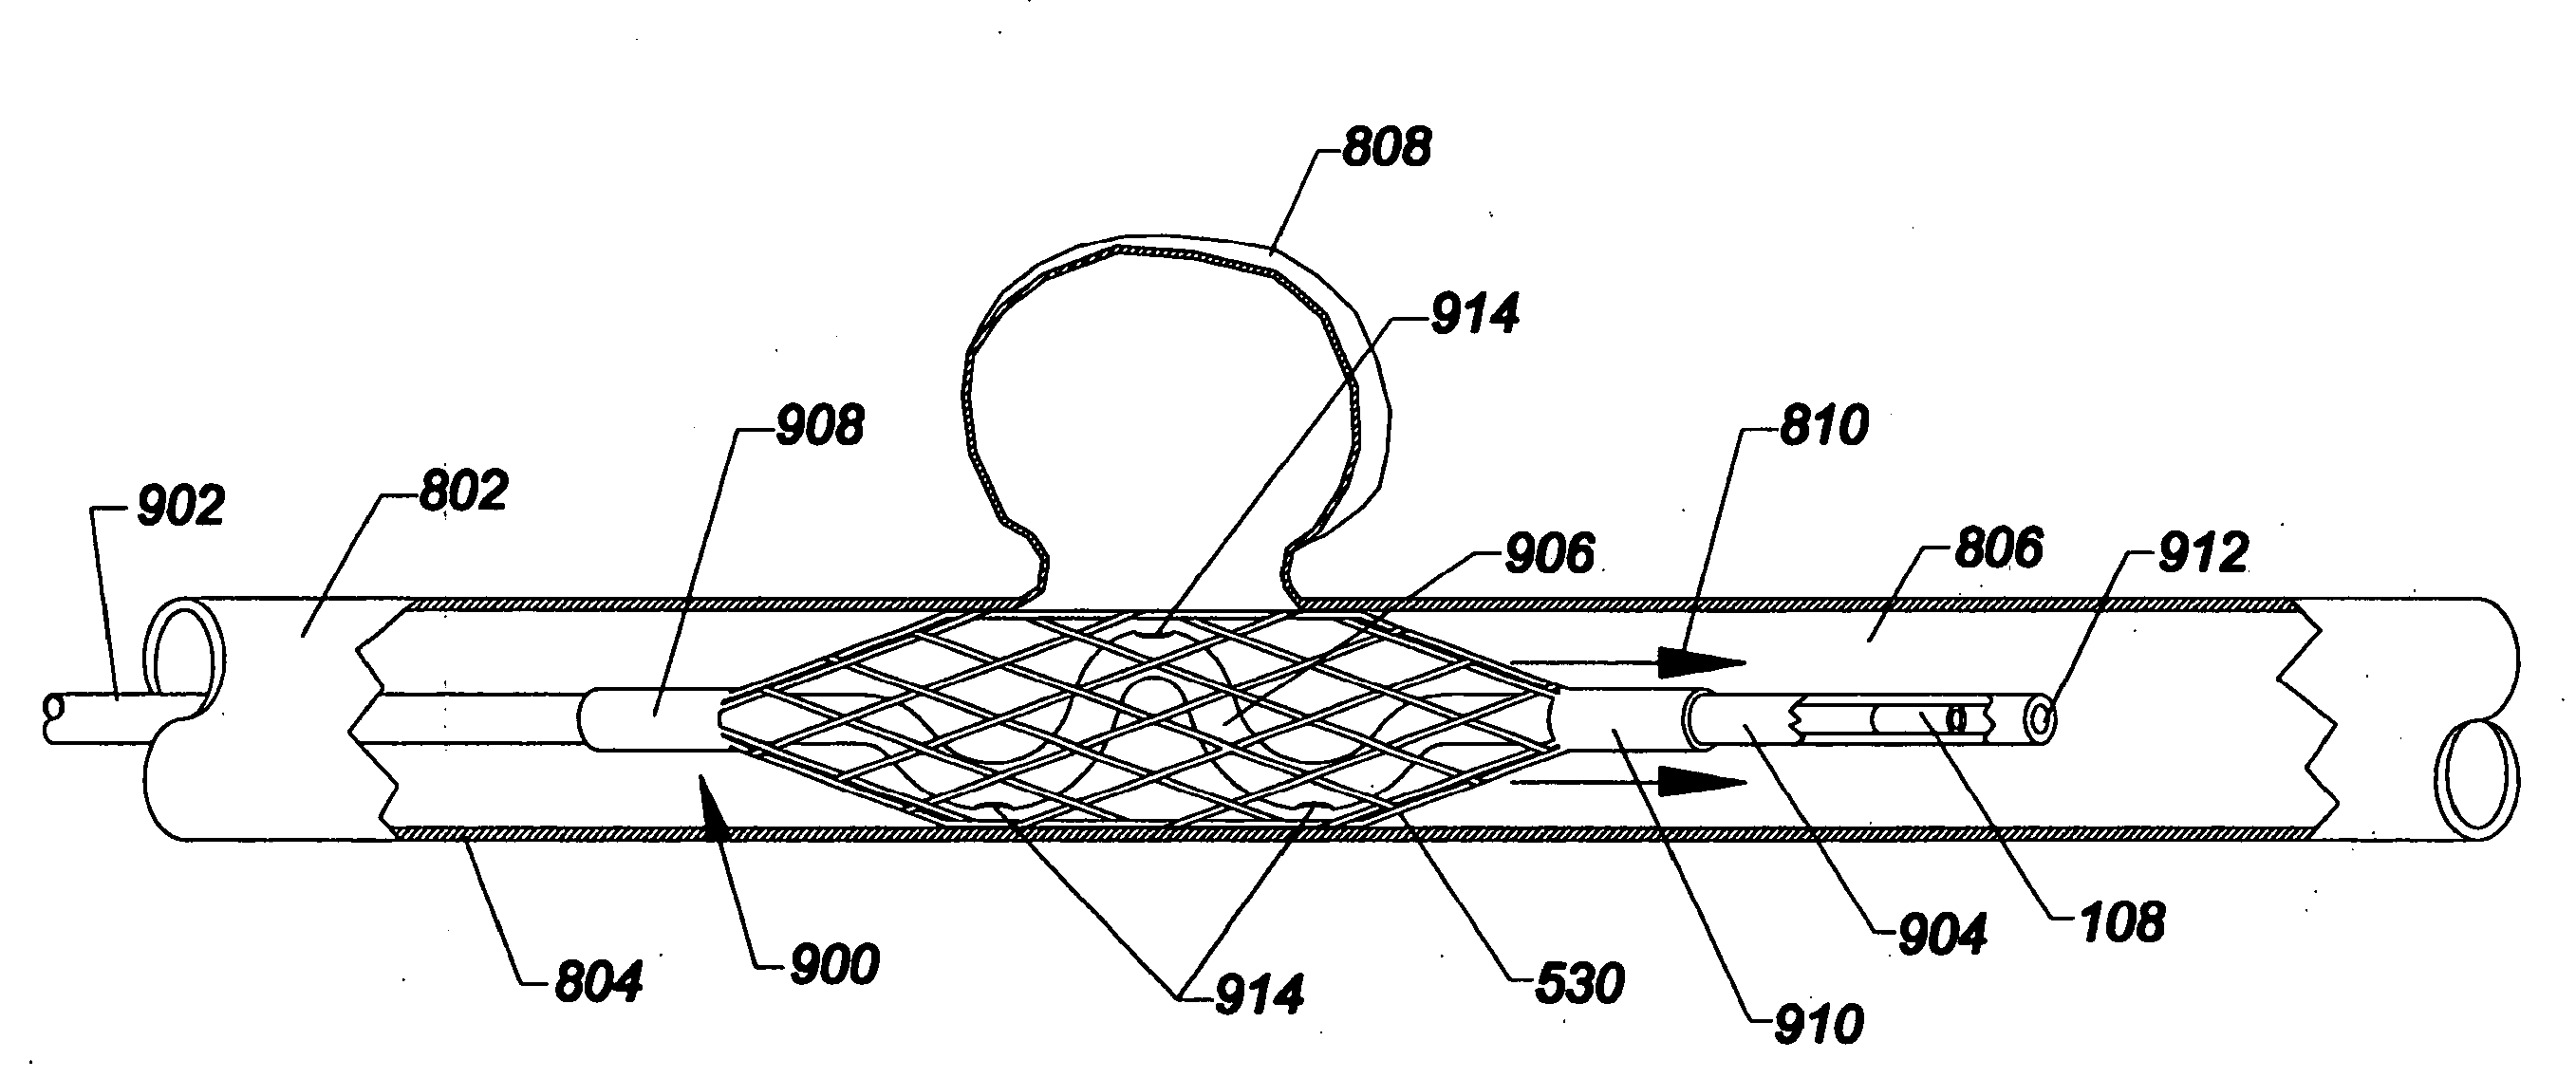 Multi-utilitarian microcatheter system and method of use